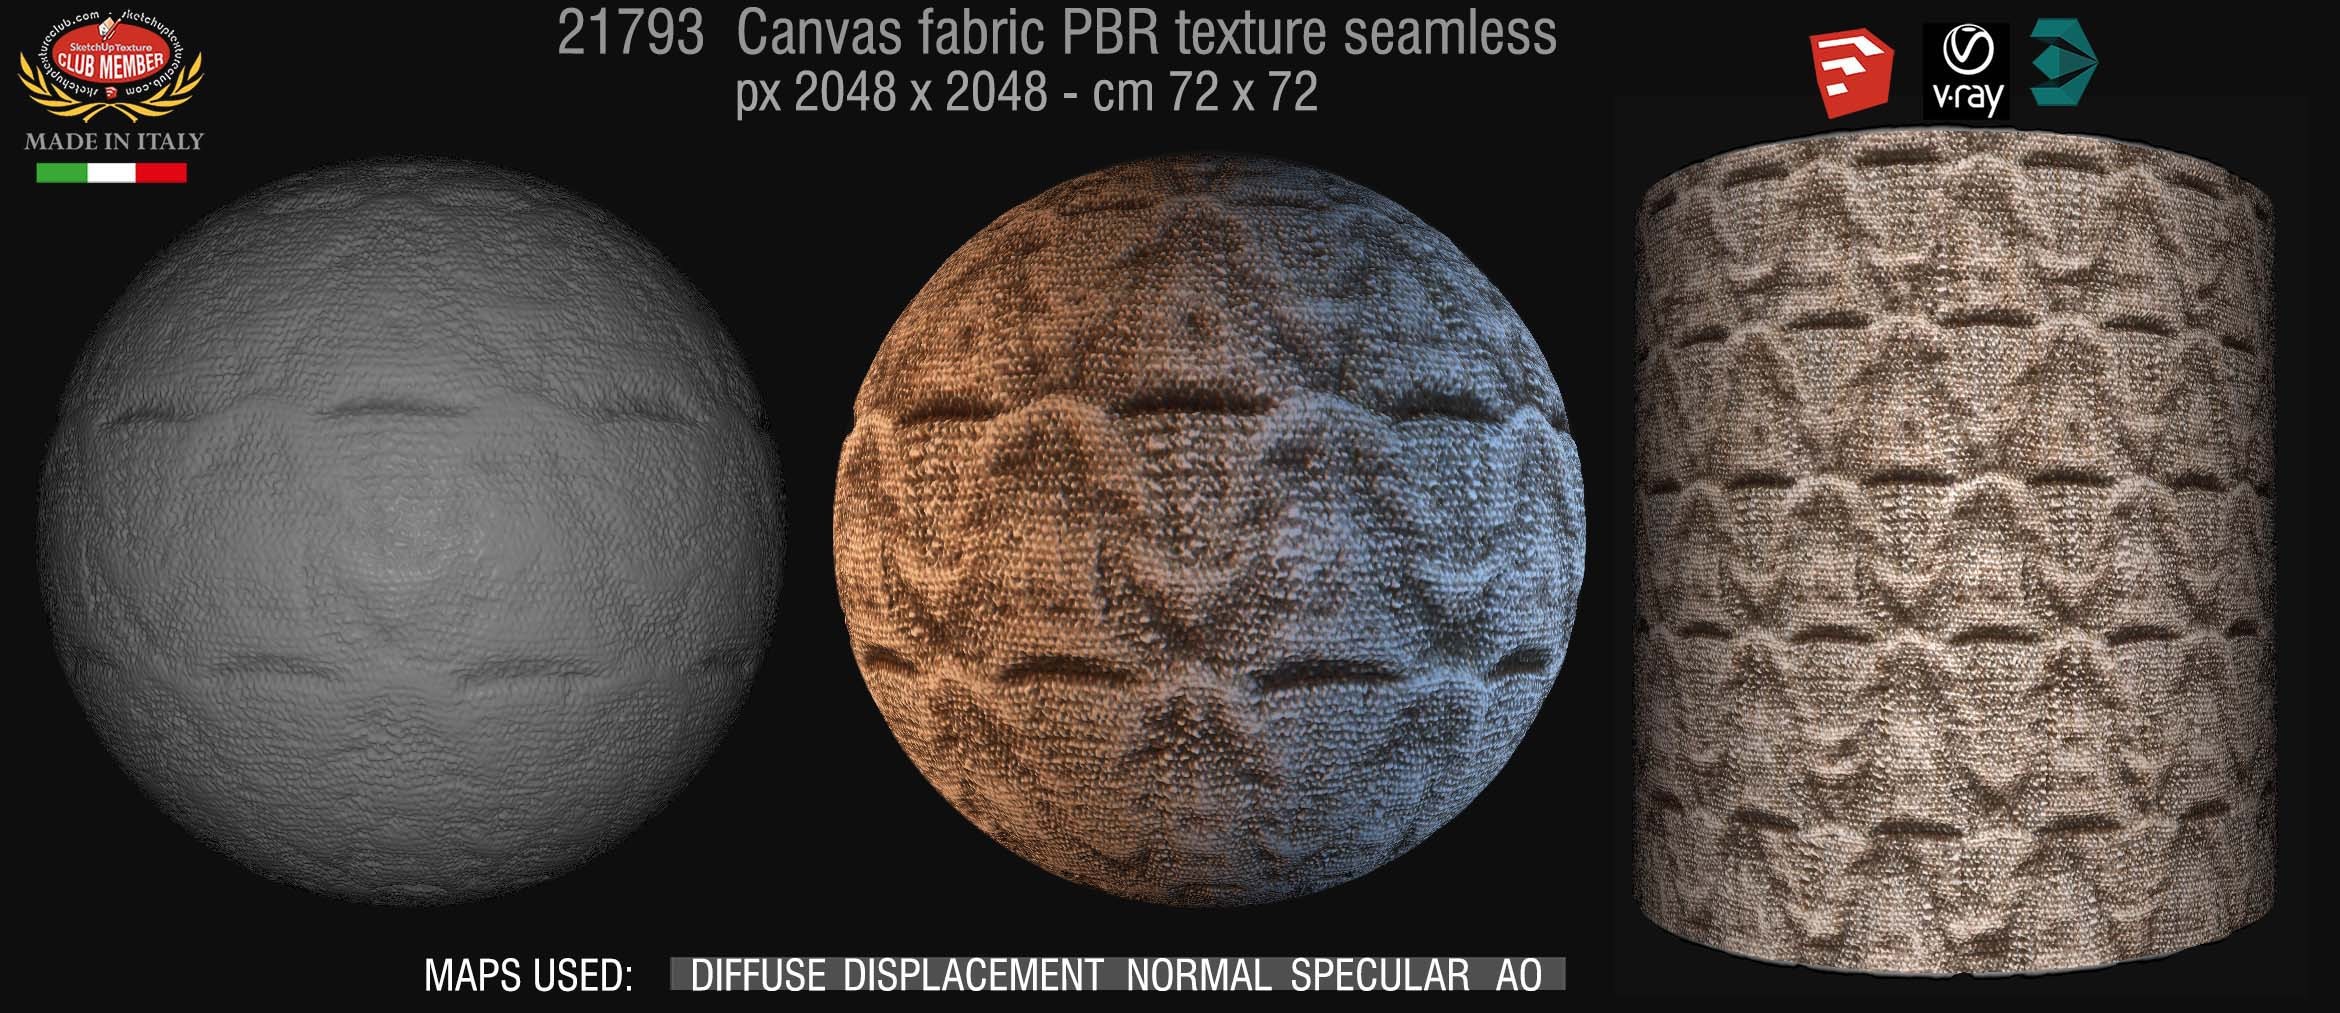 21793 wool knitted PBR texture seamless DEMO